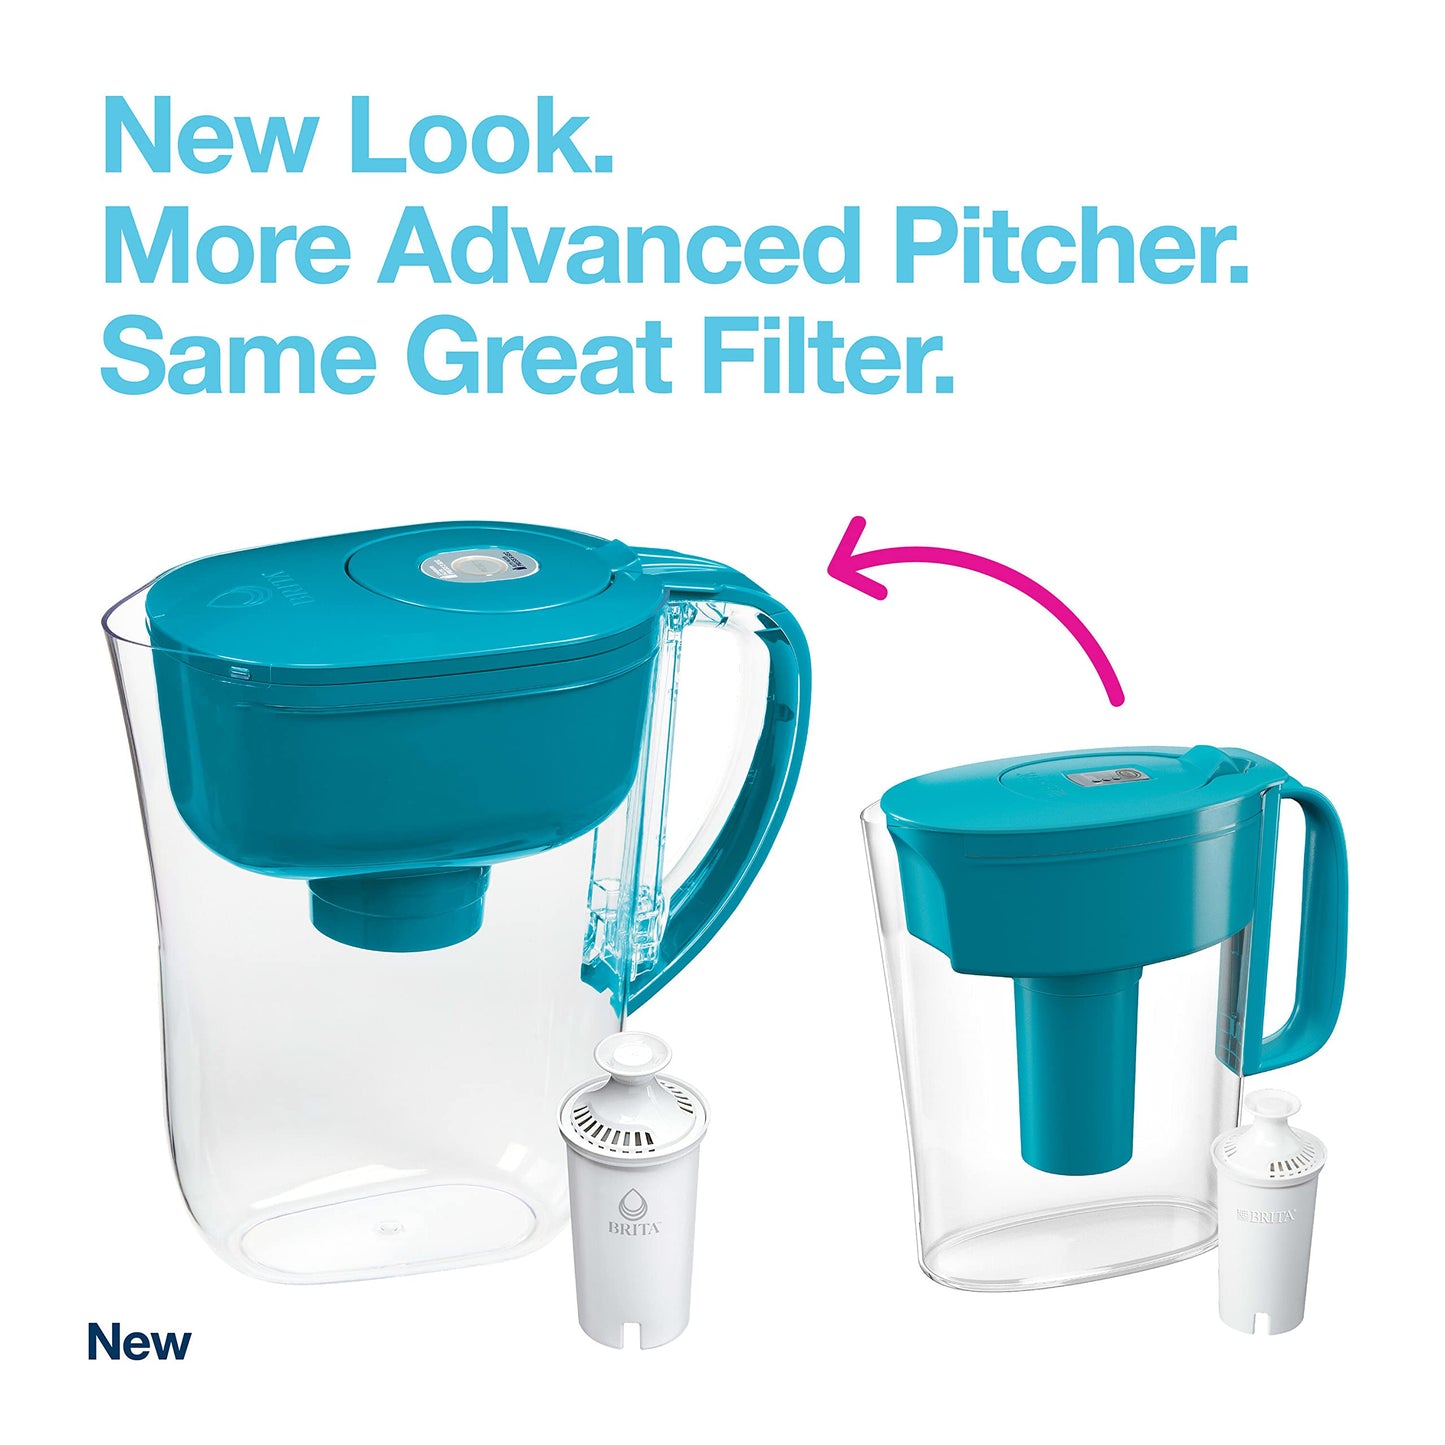 Brita Water Filter Pitcher for Tap and Drinking Water with SmartLight Filter Change Indicator + 1 Standard Filter, Lasts 2 Months, 6-Cup Capacity, Christmas Gift for Men and Women, BPA Free, Turquoise